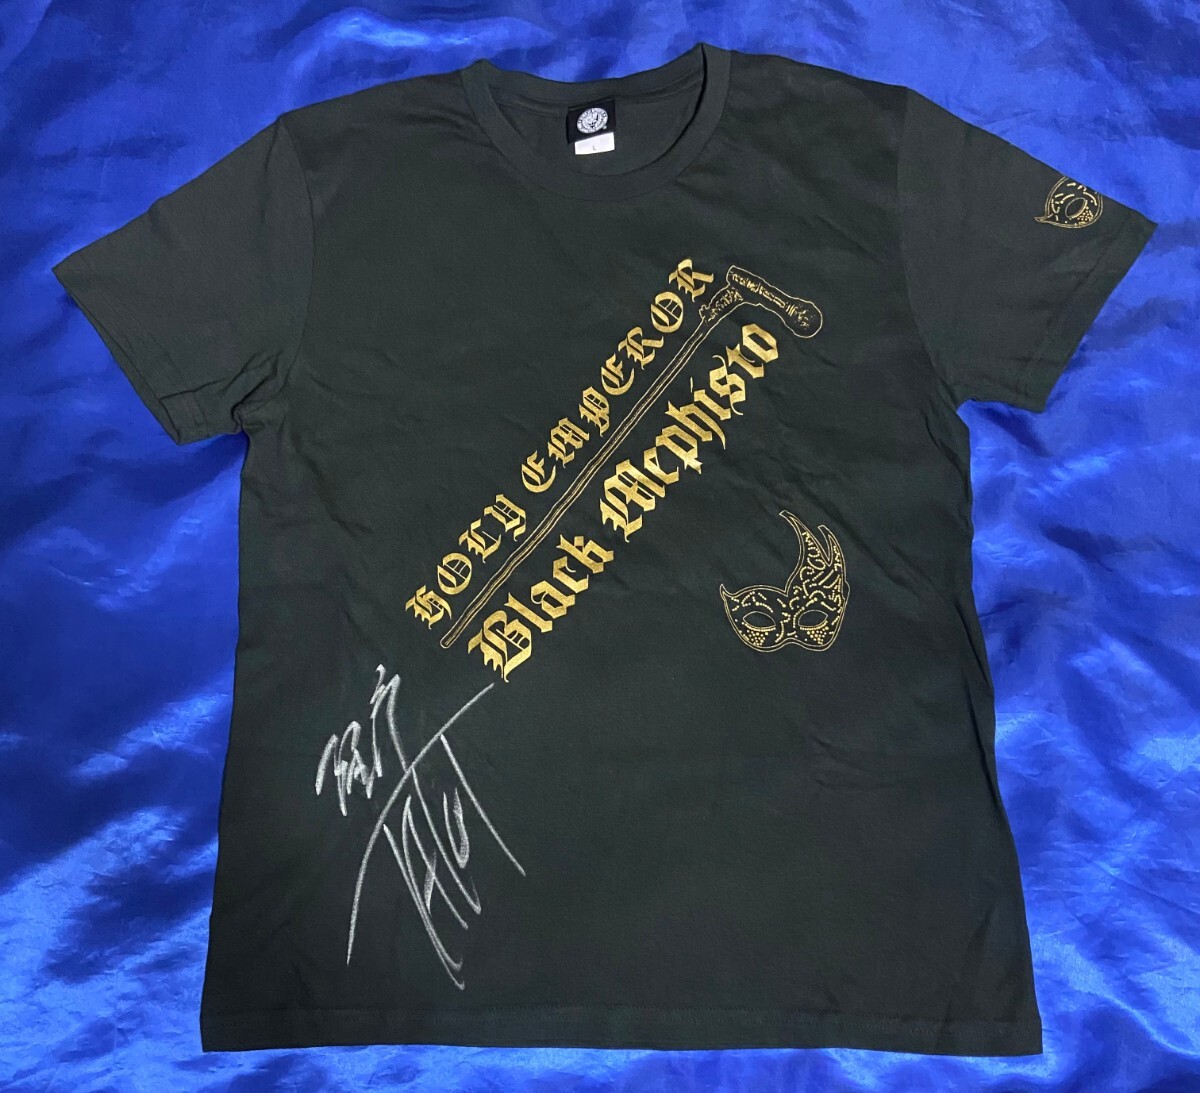  New Japan Professional Wrestling Taichi player with autograph shirt size L